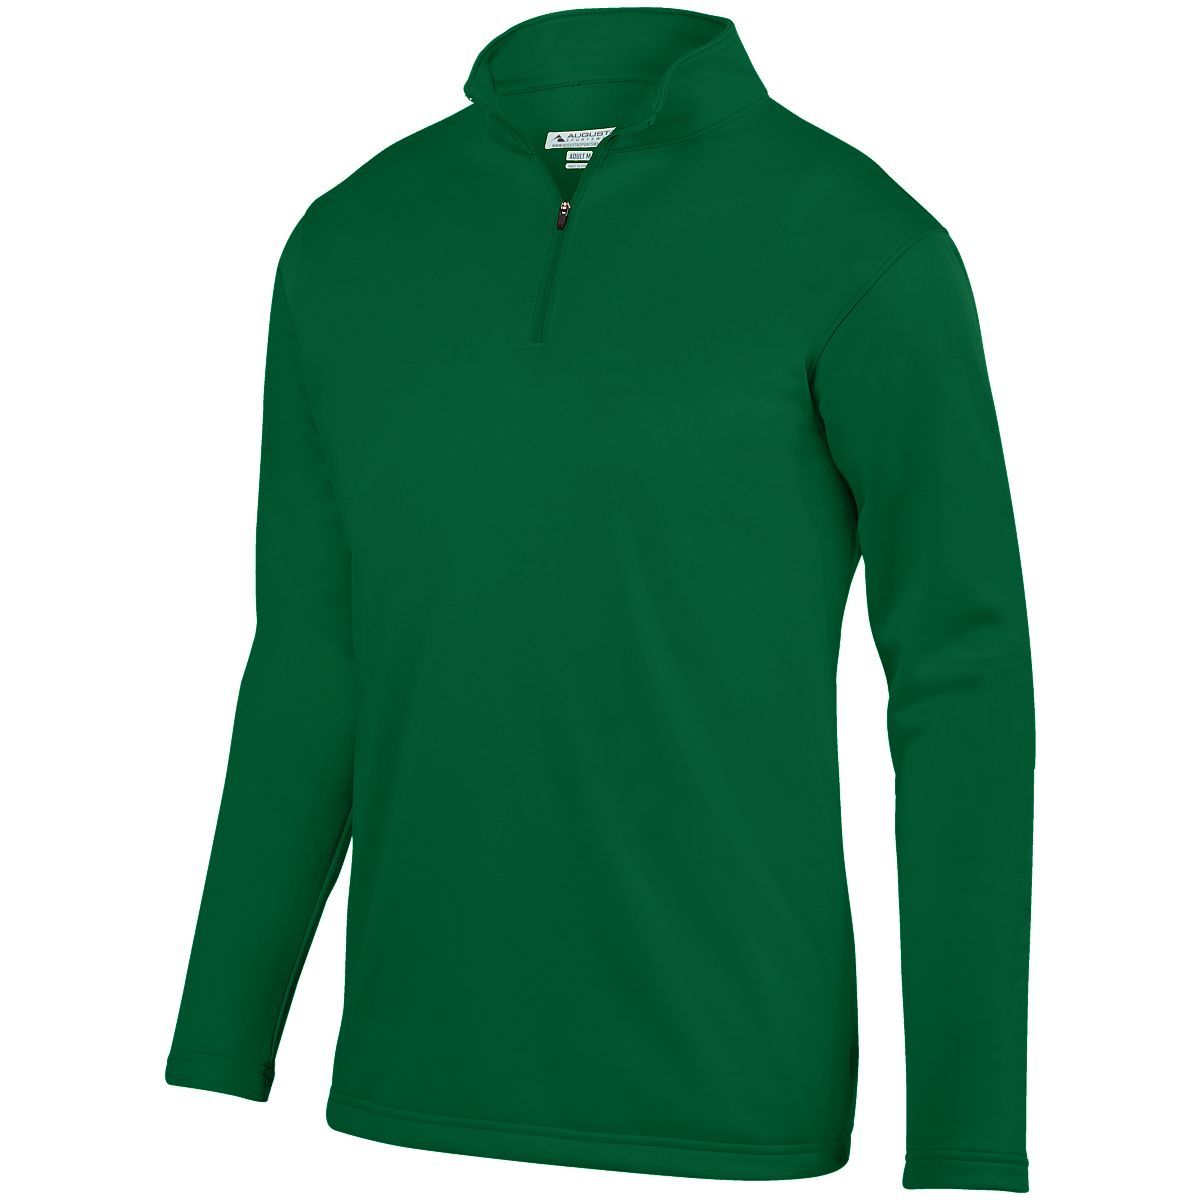 Youth Wicking Fleece Pullover 5508